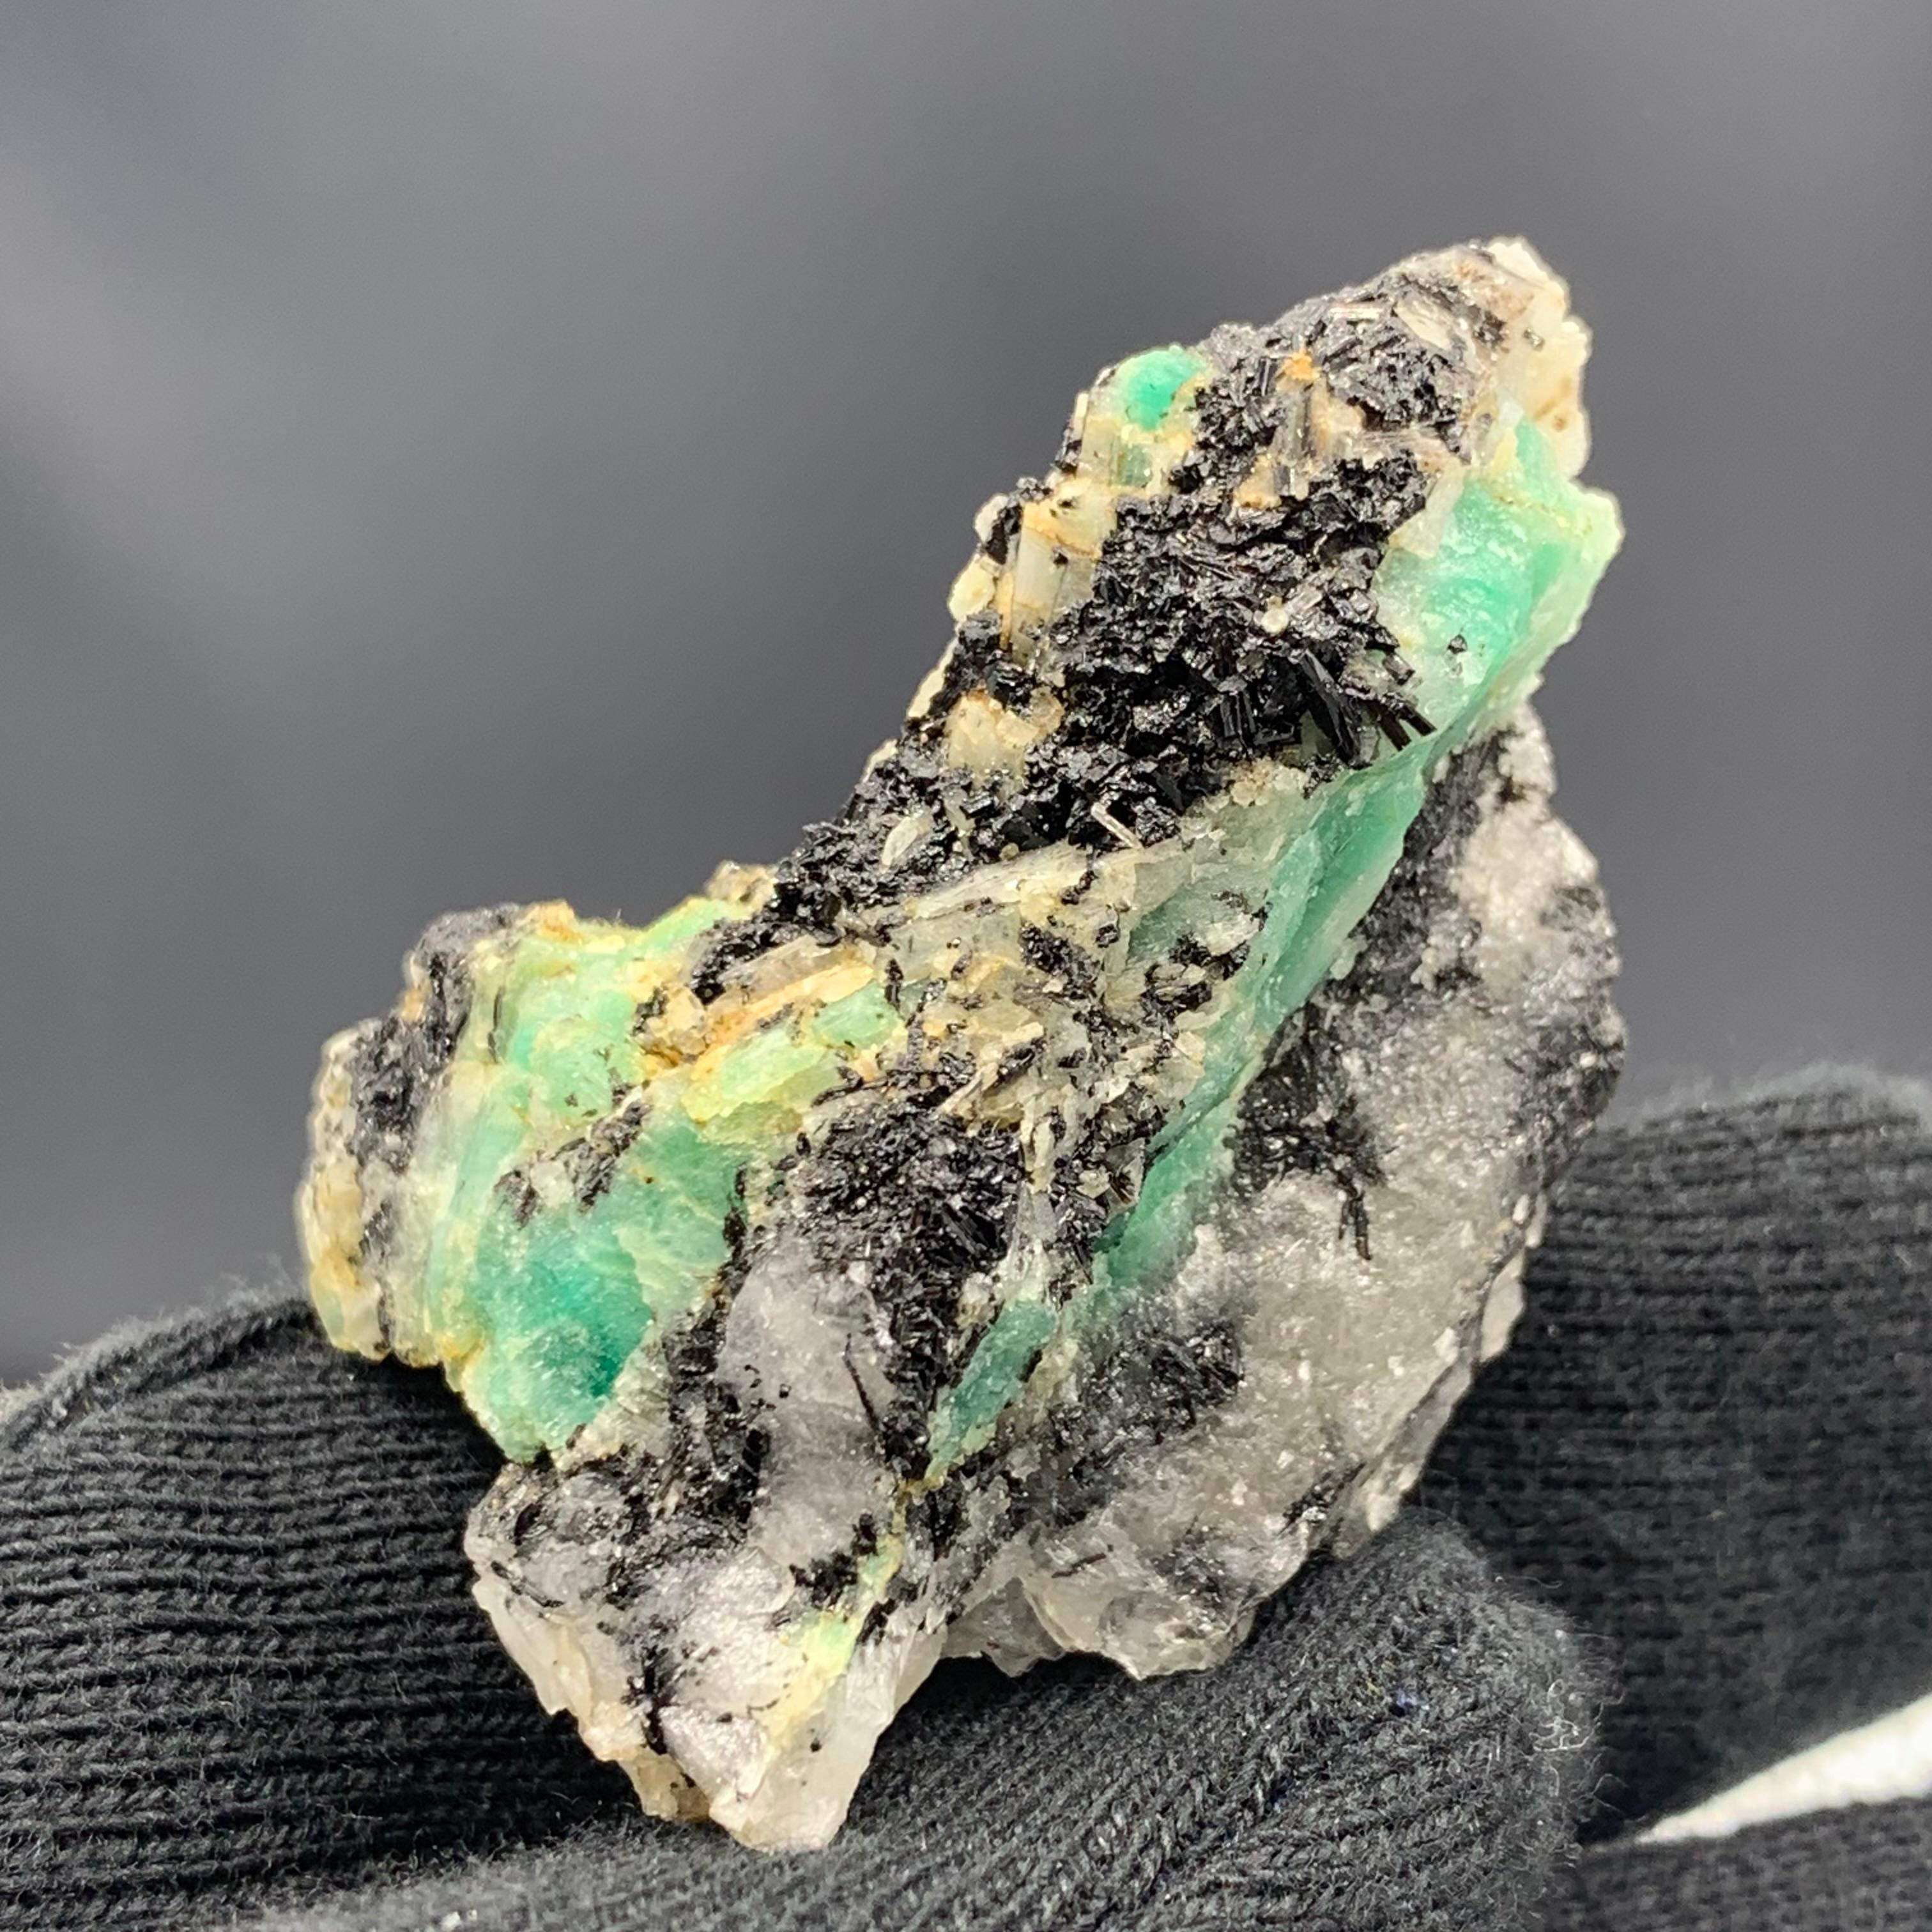 Other 20.98 Gram Lovely Emerald Specimen From Chitral Valley, Pakistan  For Sale